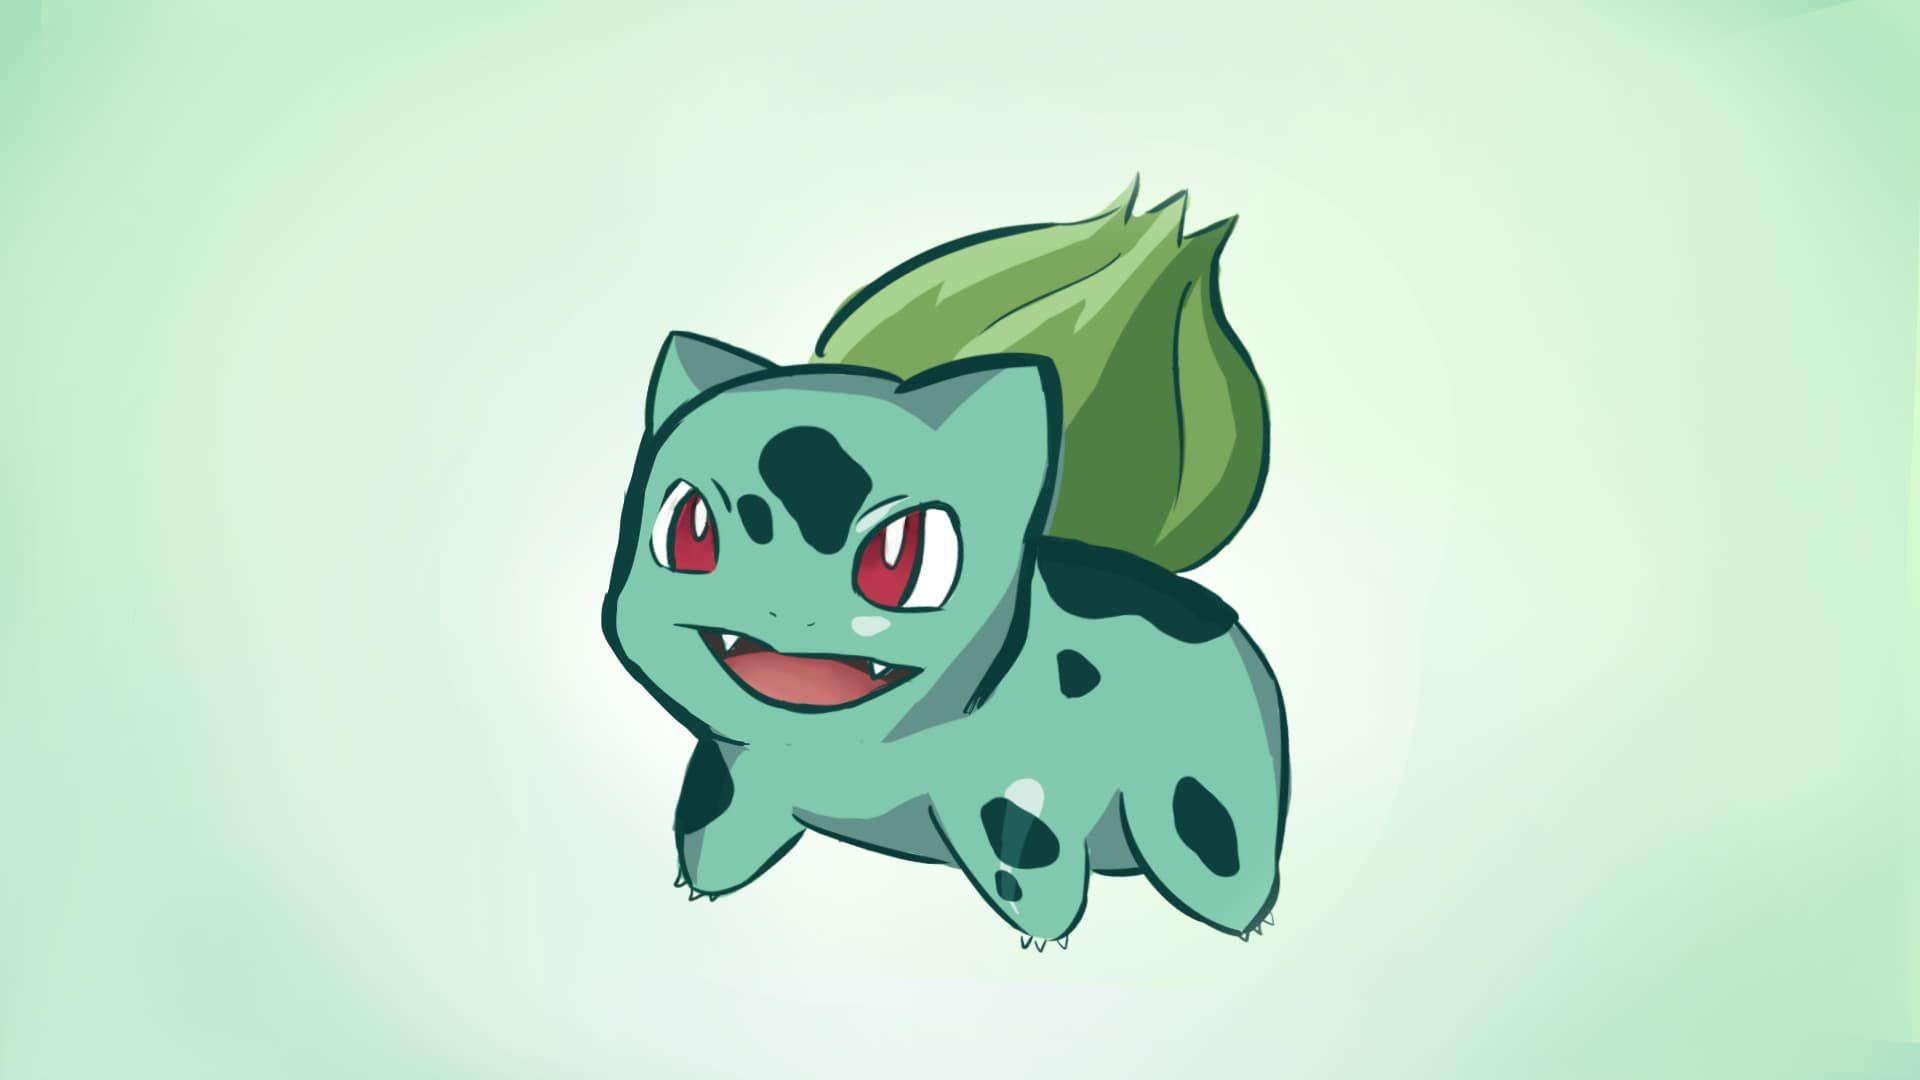 Bulbasaur Wallpaper Image Photo Picture Background